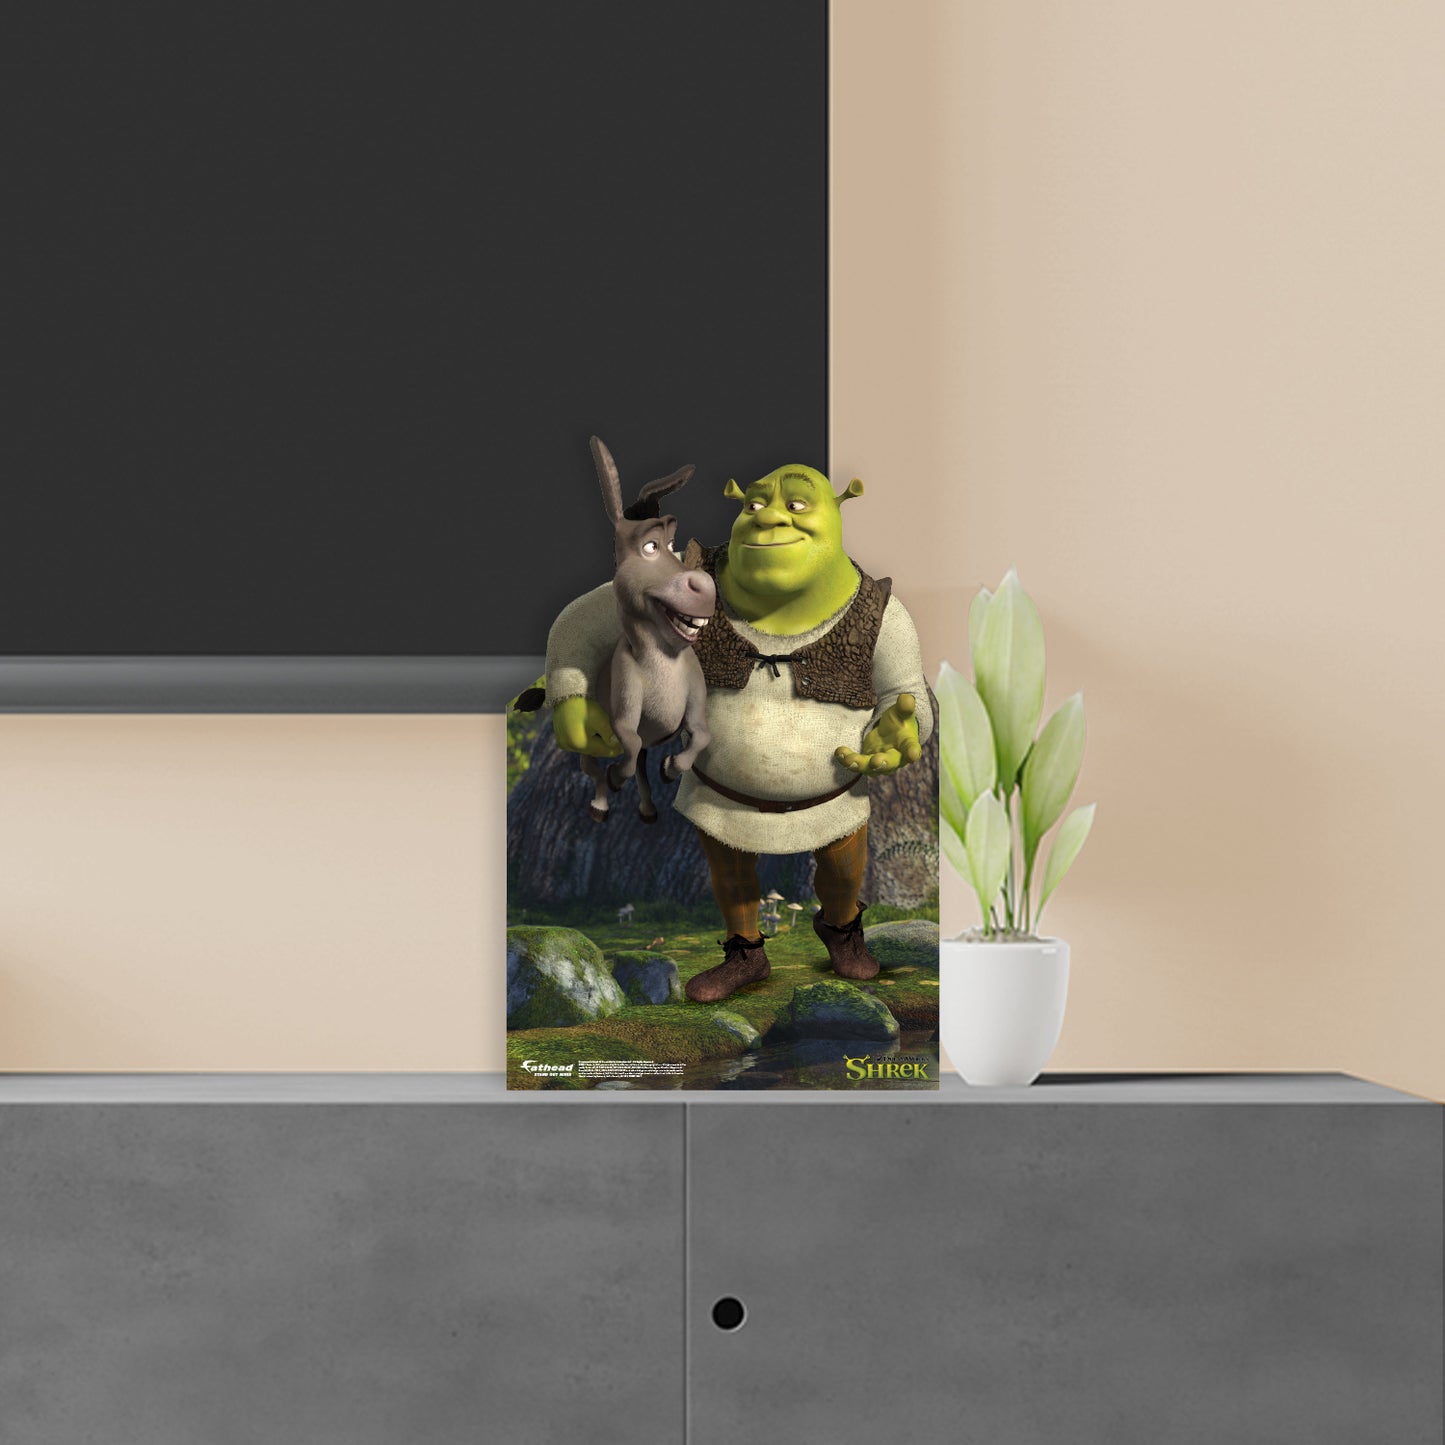 Shrek: Donkey & Shrek Mini   Cardstock Cutout  - Officially Licensed NBC Universal    Stand Out